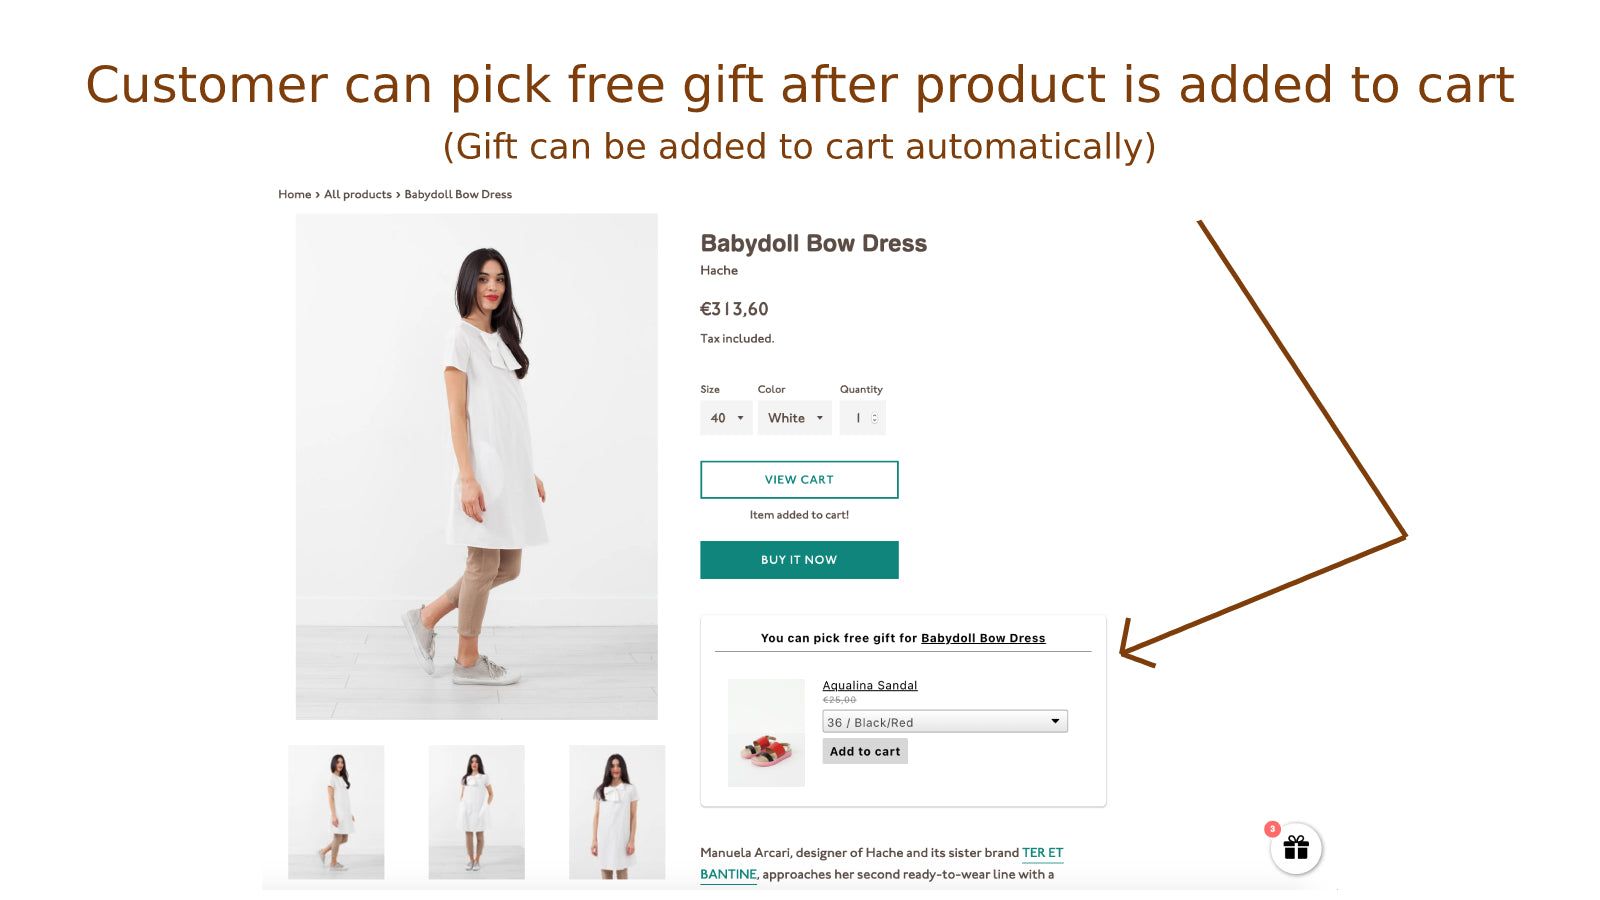 Customer can pick free gift after product is added to cart